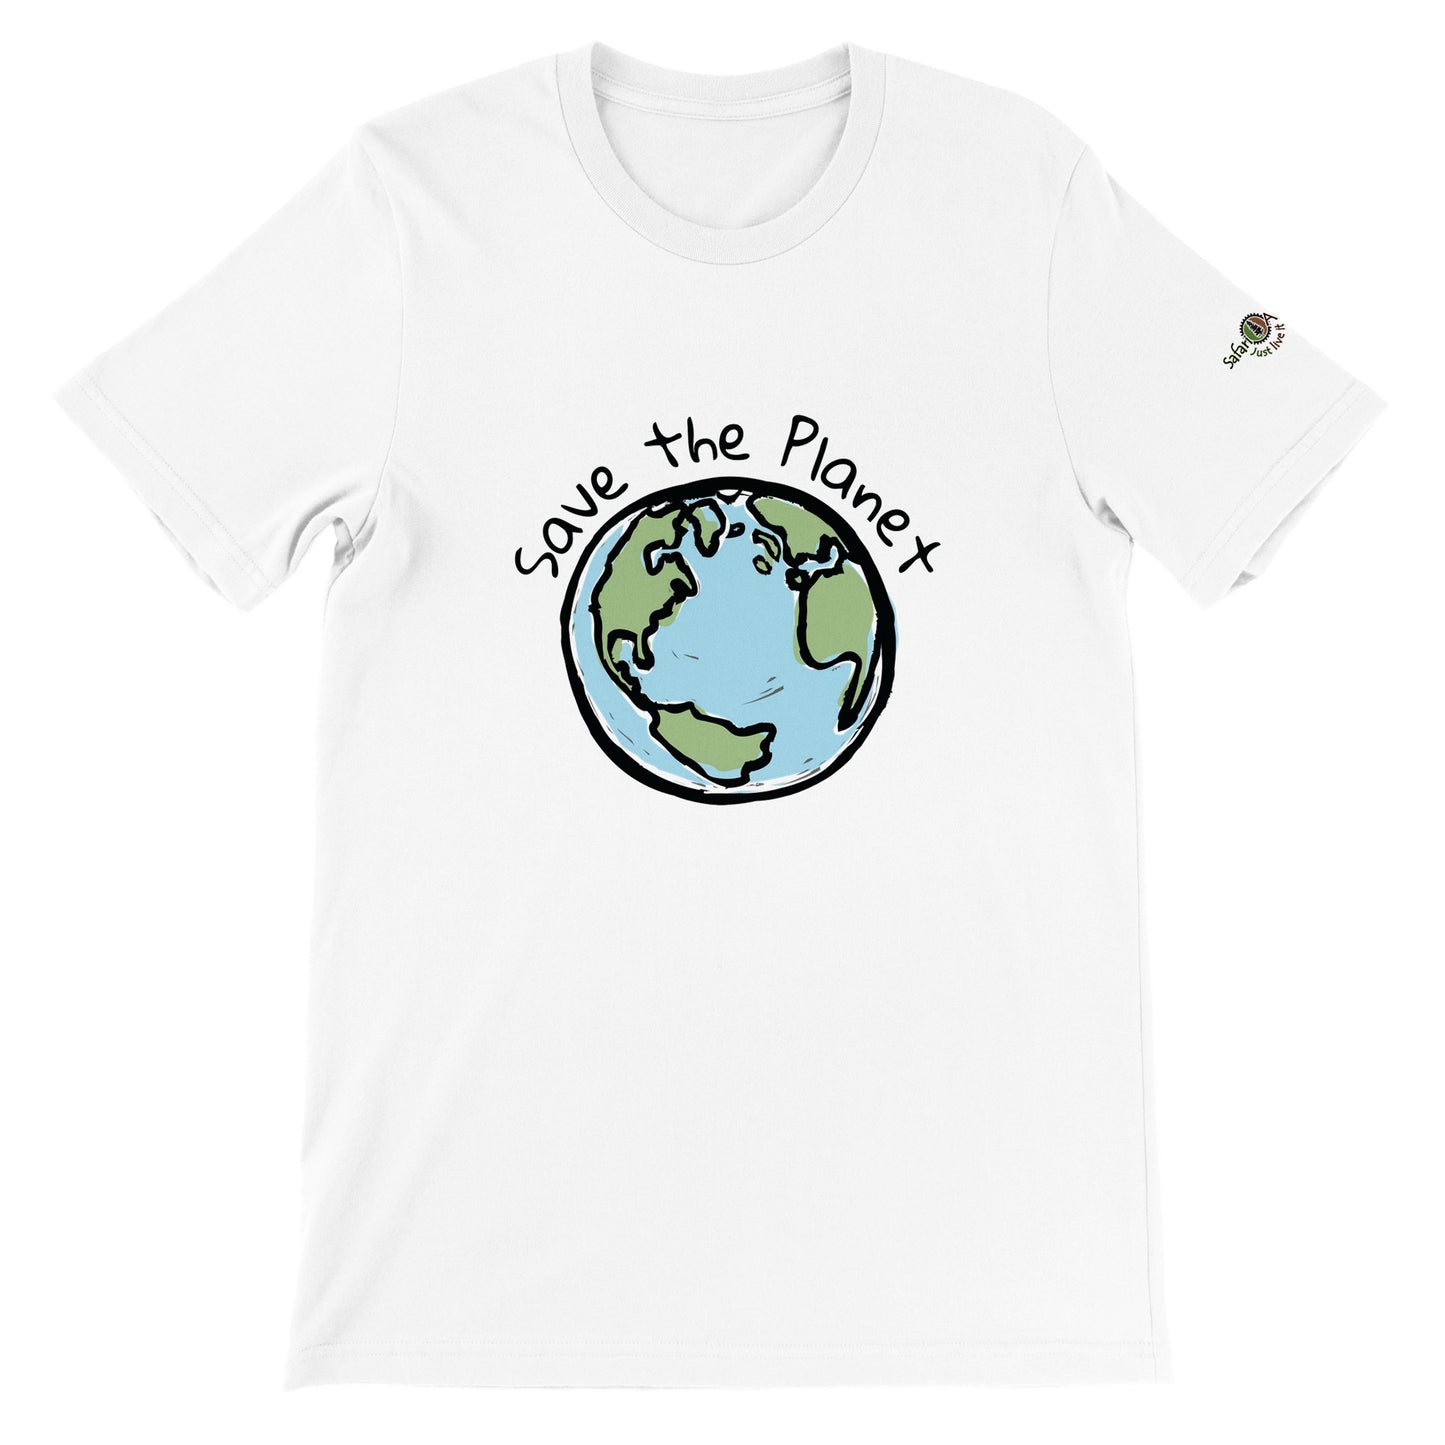 Save the planet unisex t-shirt